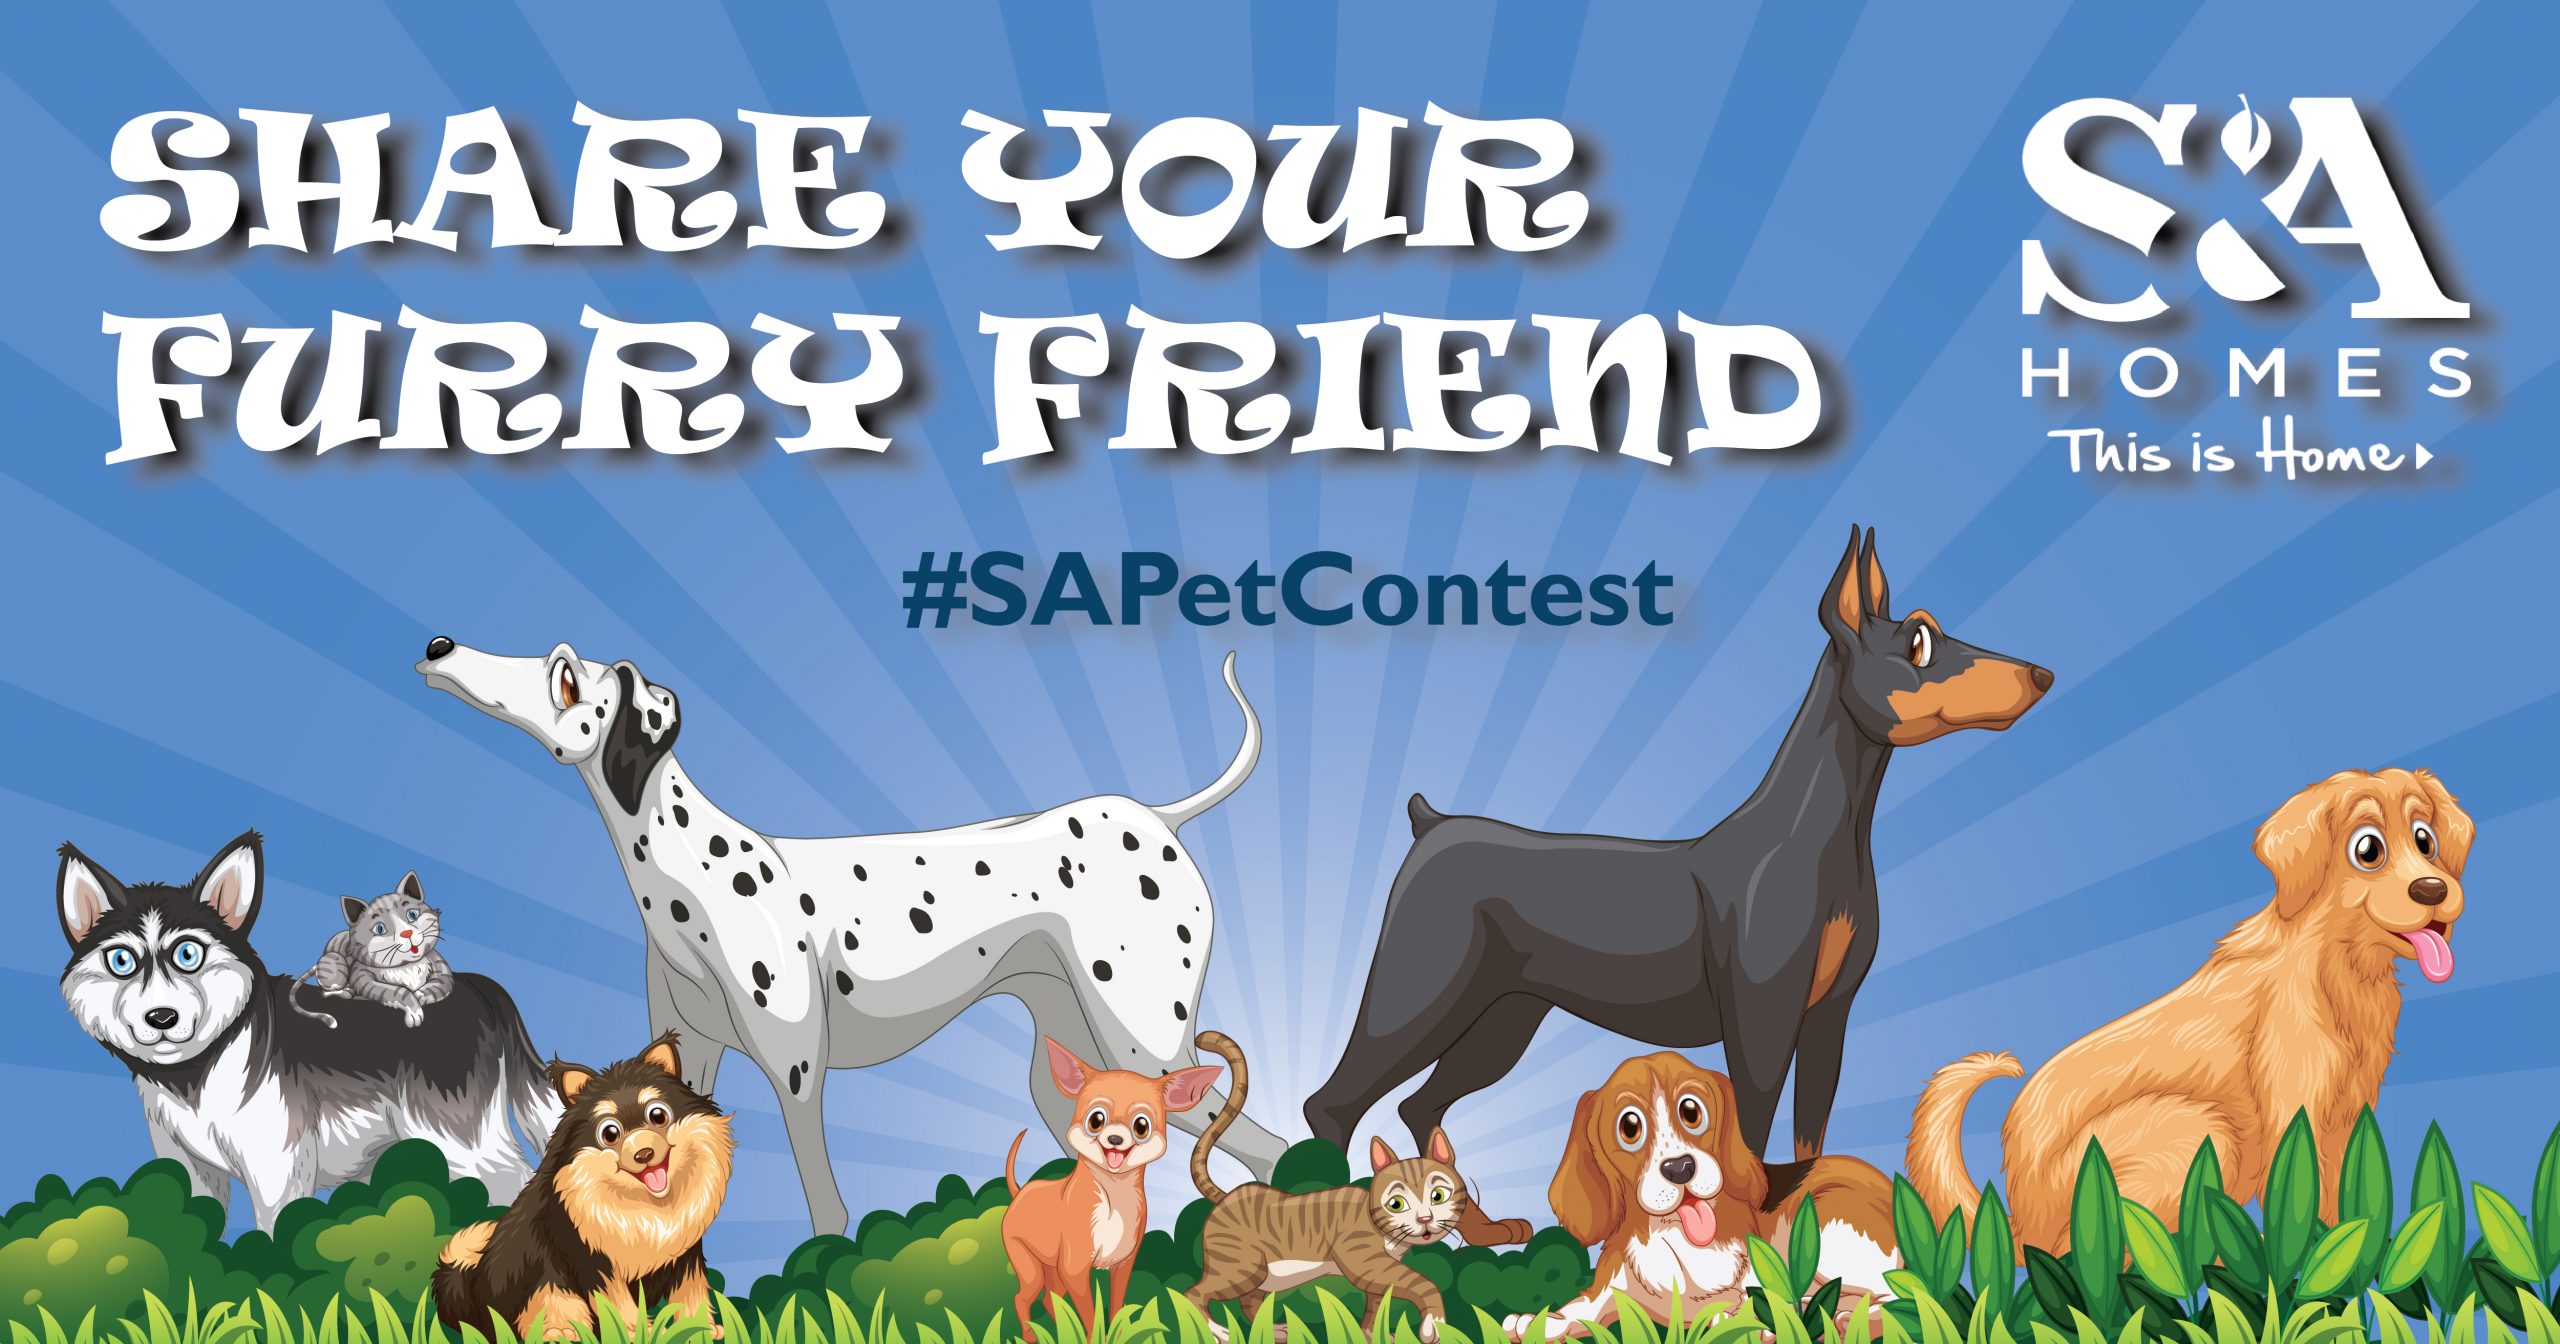 S&A Homes, a home builder in Pennsylvania, launched a “Share Your Furry Friend” photo contest this spring. 